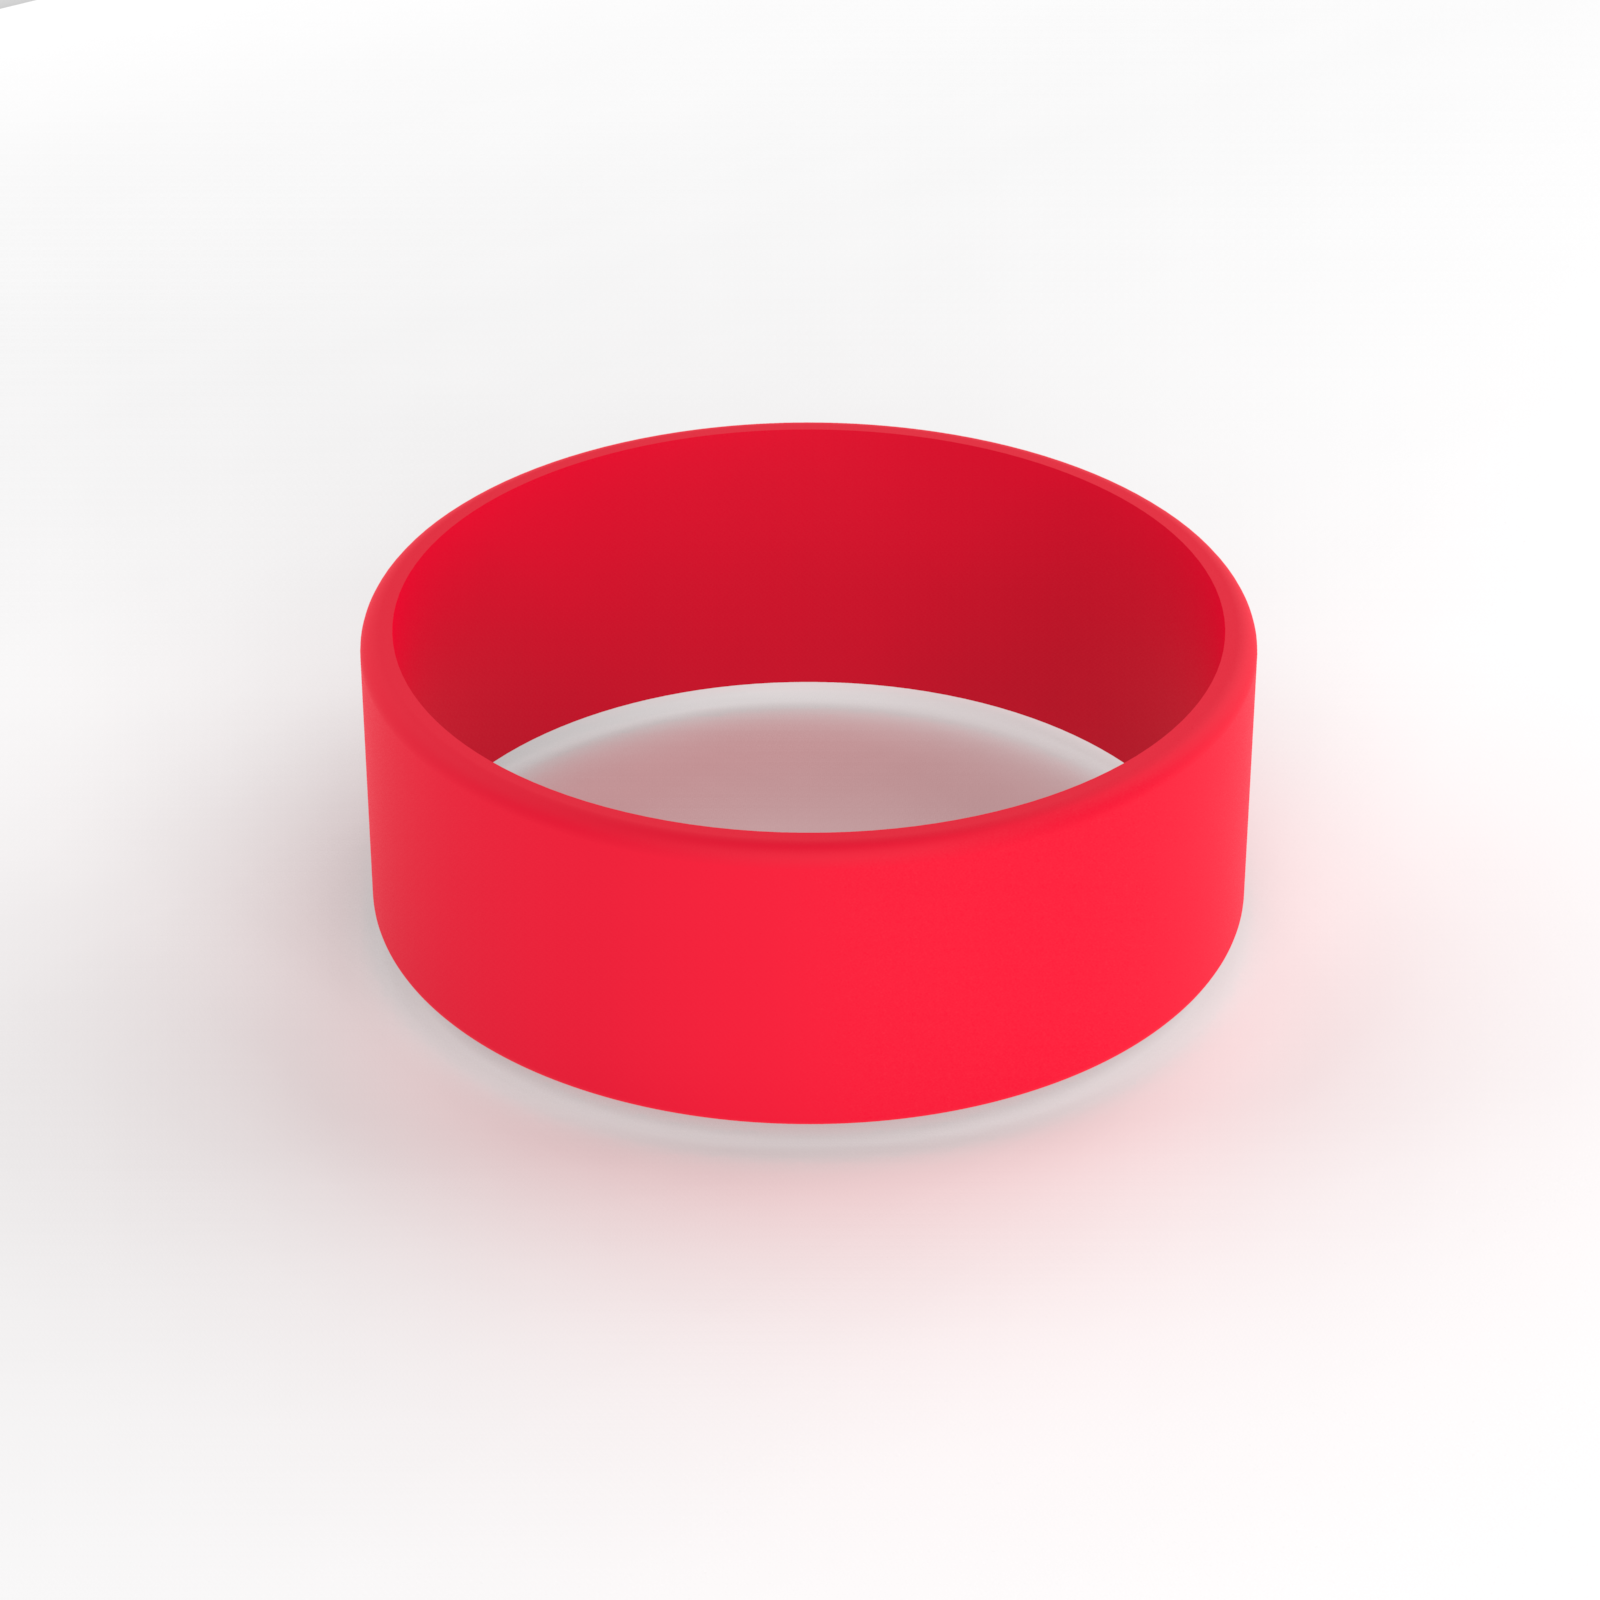 Grifiti Band Joes 3 x 0.75 inch Mini Silicone Bands for Cords Rings Gaskets Wraps - Grifiti